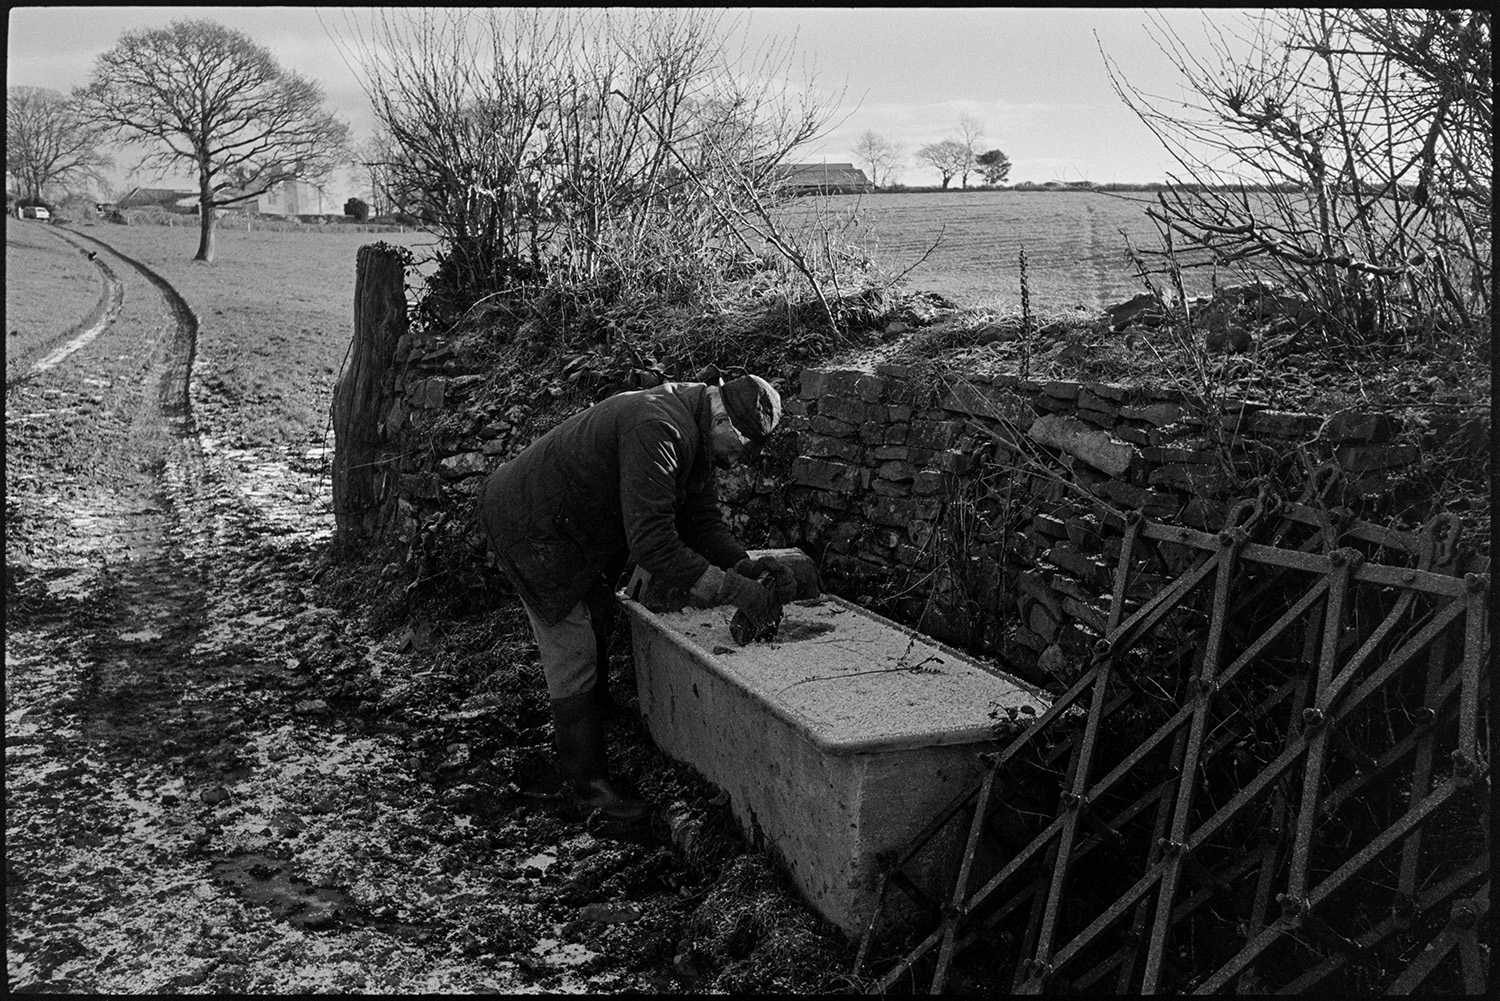 Muddy field and drinking trough. 
[A man breaking up ice on a drinking trough by a stone wall and field at Harepath, Beaford. A harrow is lent against the wall and farm buildings can be seen beyond the field. A light dusting of snow is on the ground.]